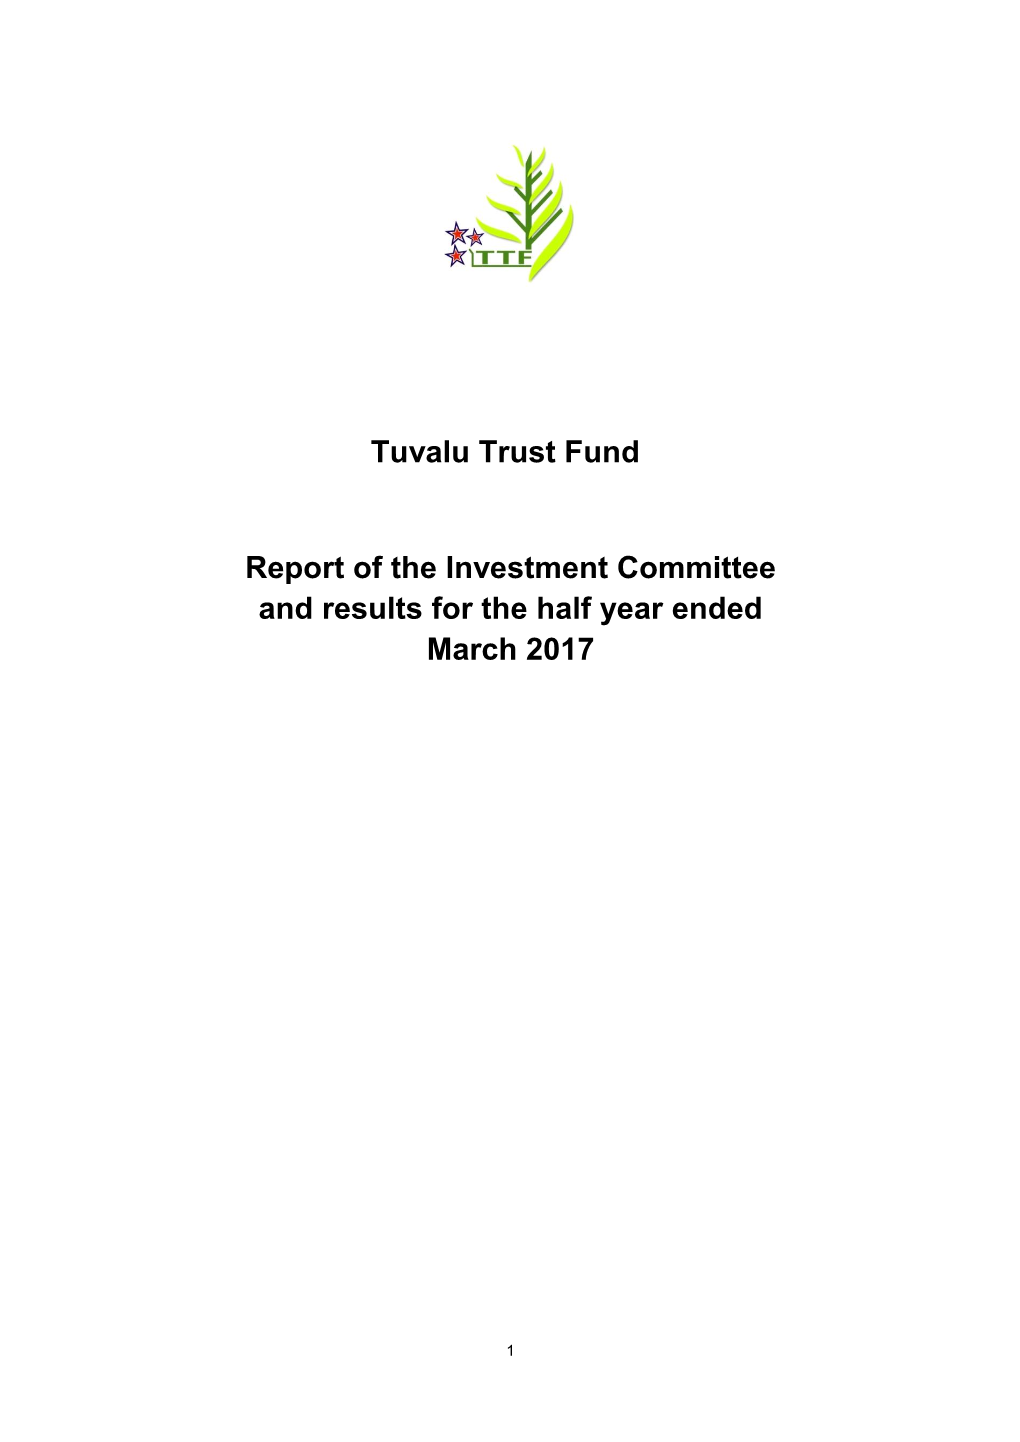 Tuvalu Trust Fund Report of the Investment Committee and Results